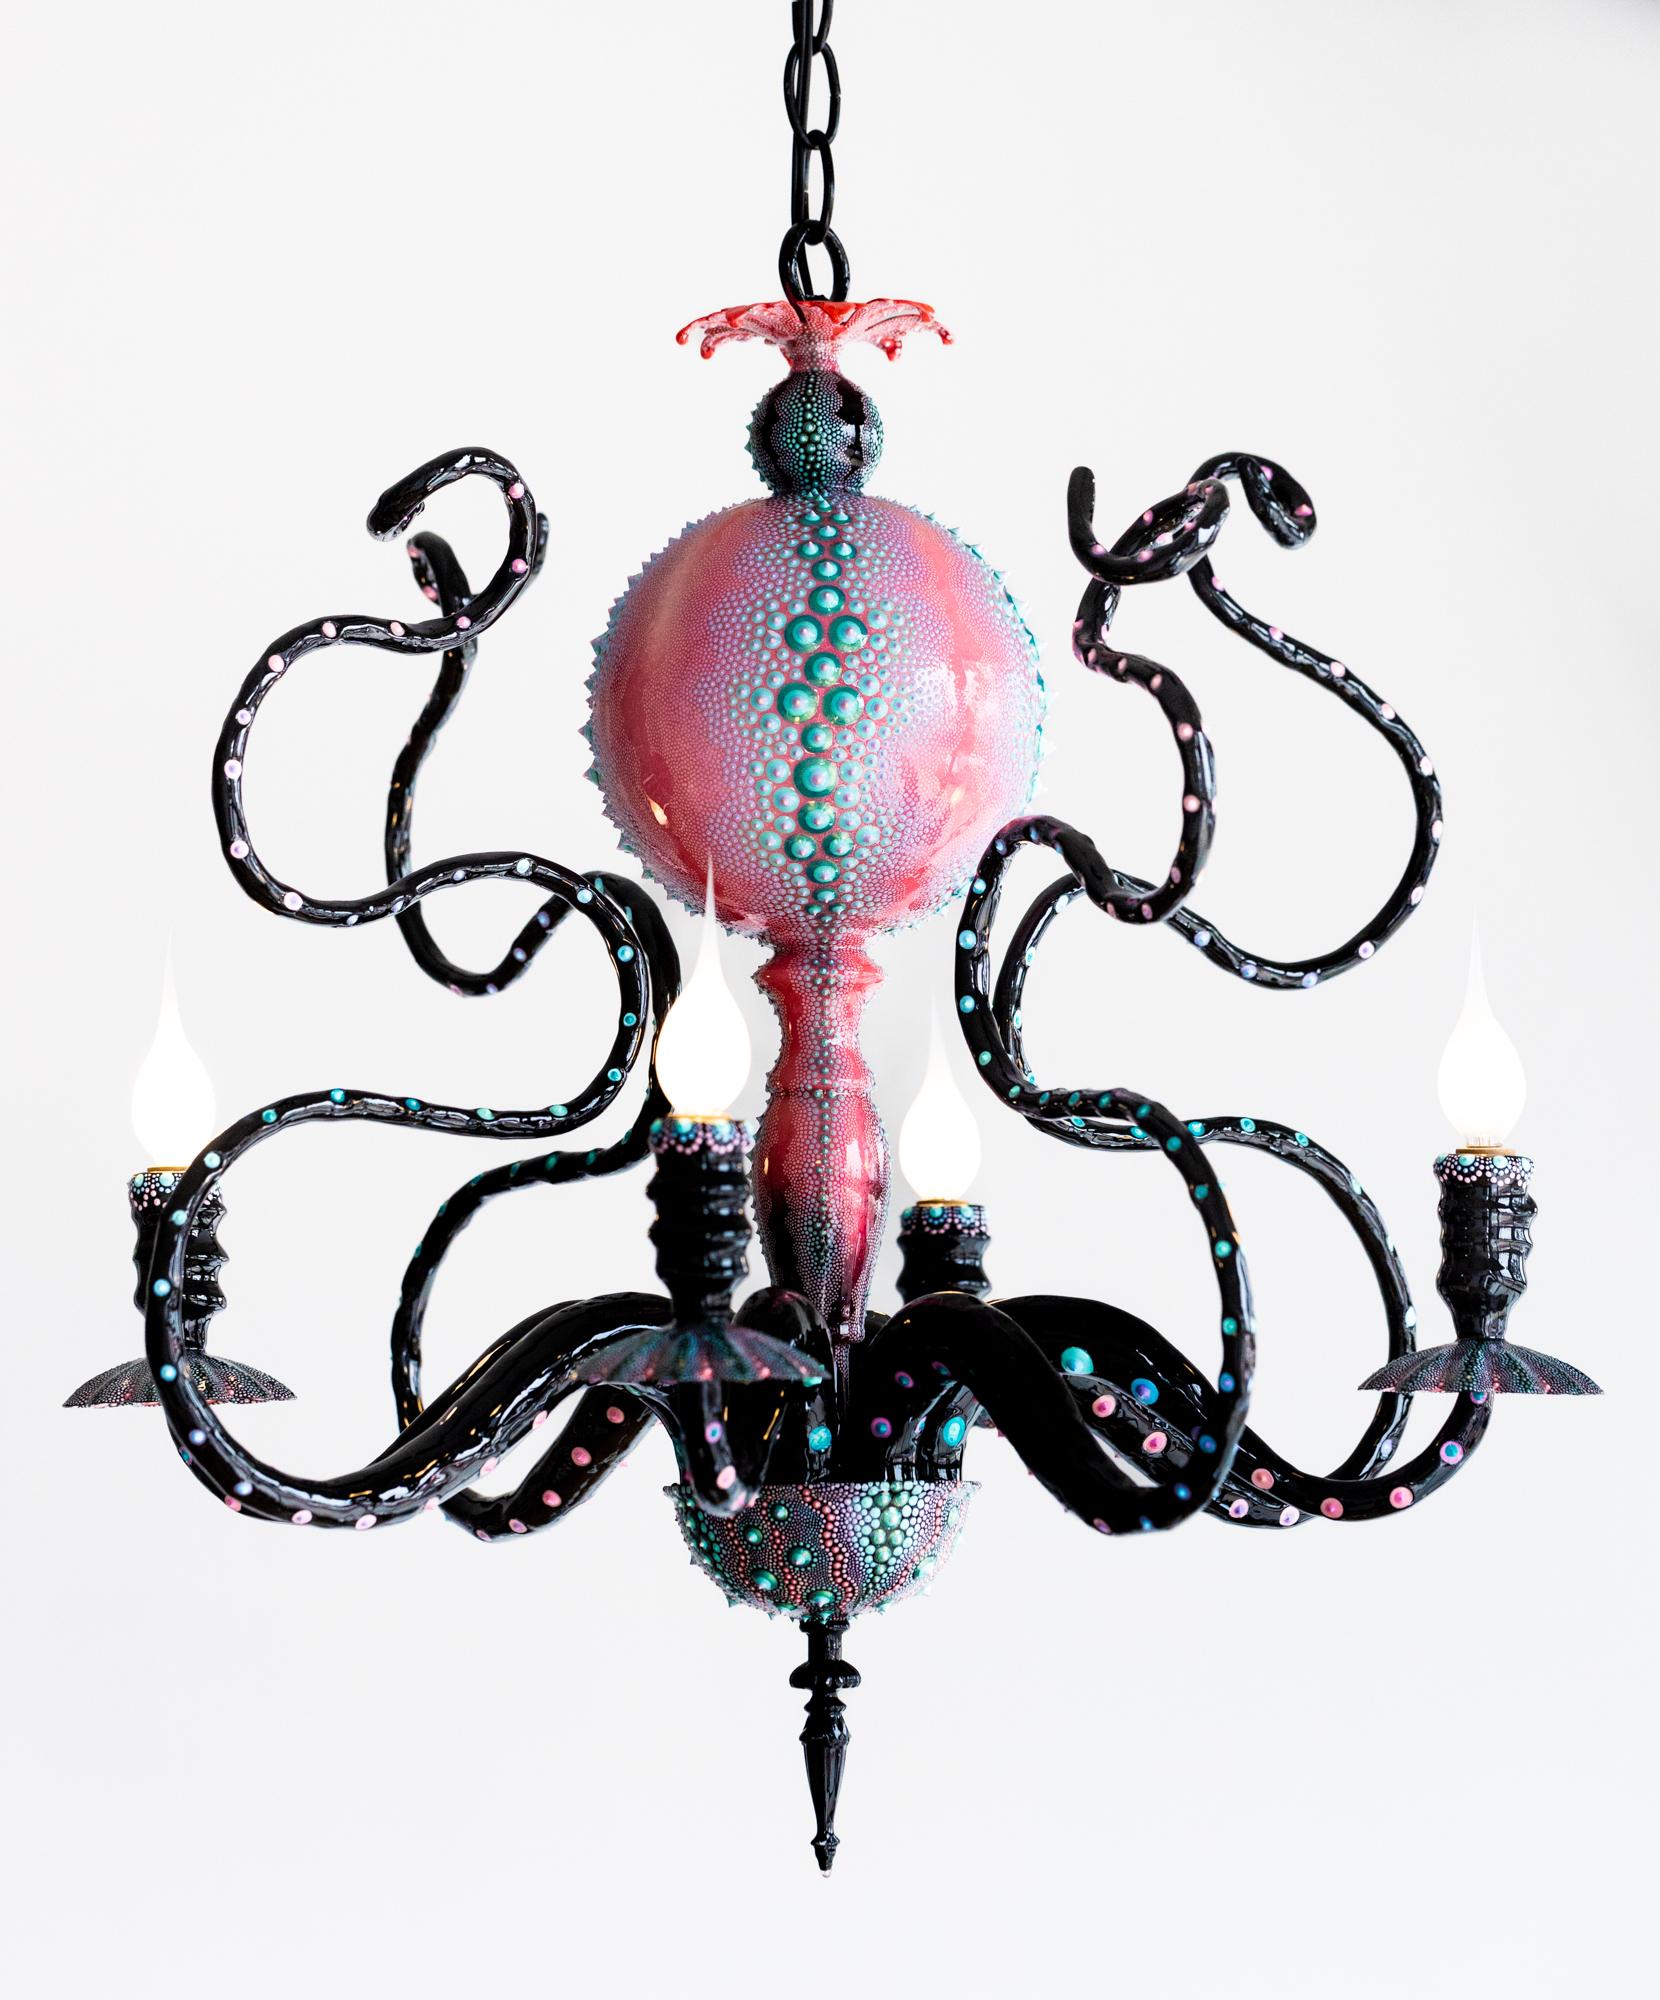 "Cotton Candy Octopus Chandelier" Dimensional paint on custom chandelier - Mixed Media Art by PJ Linden